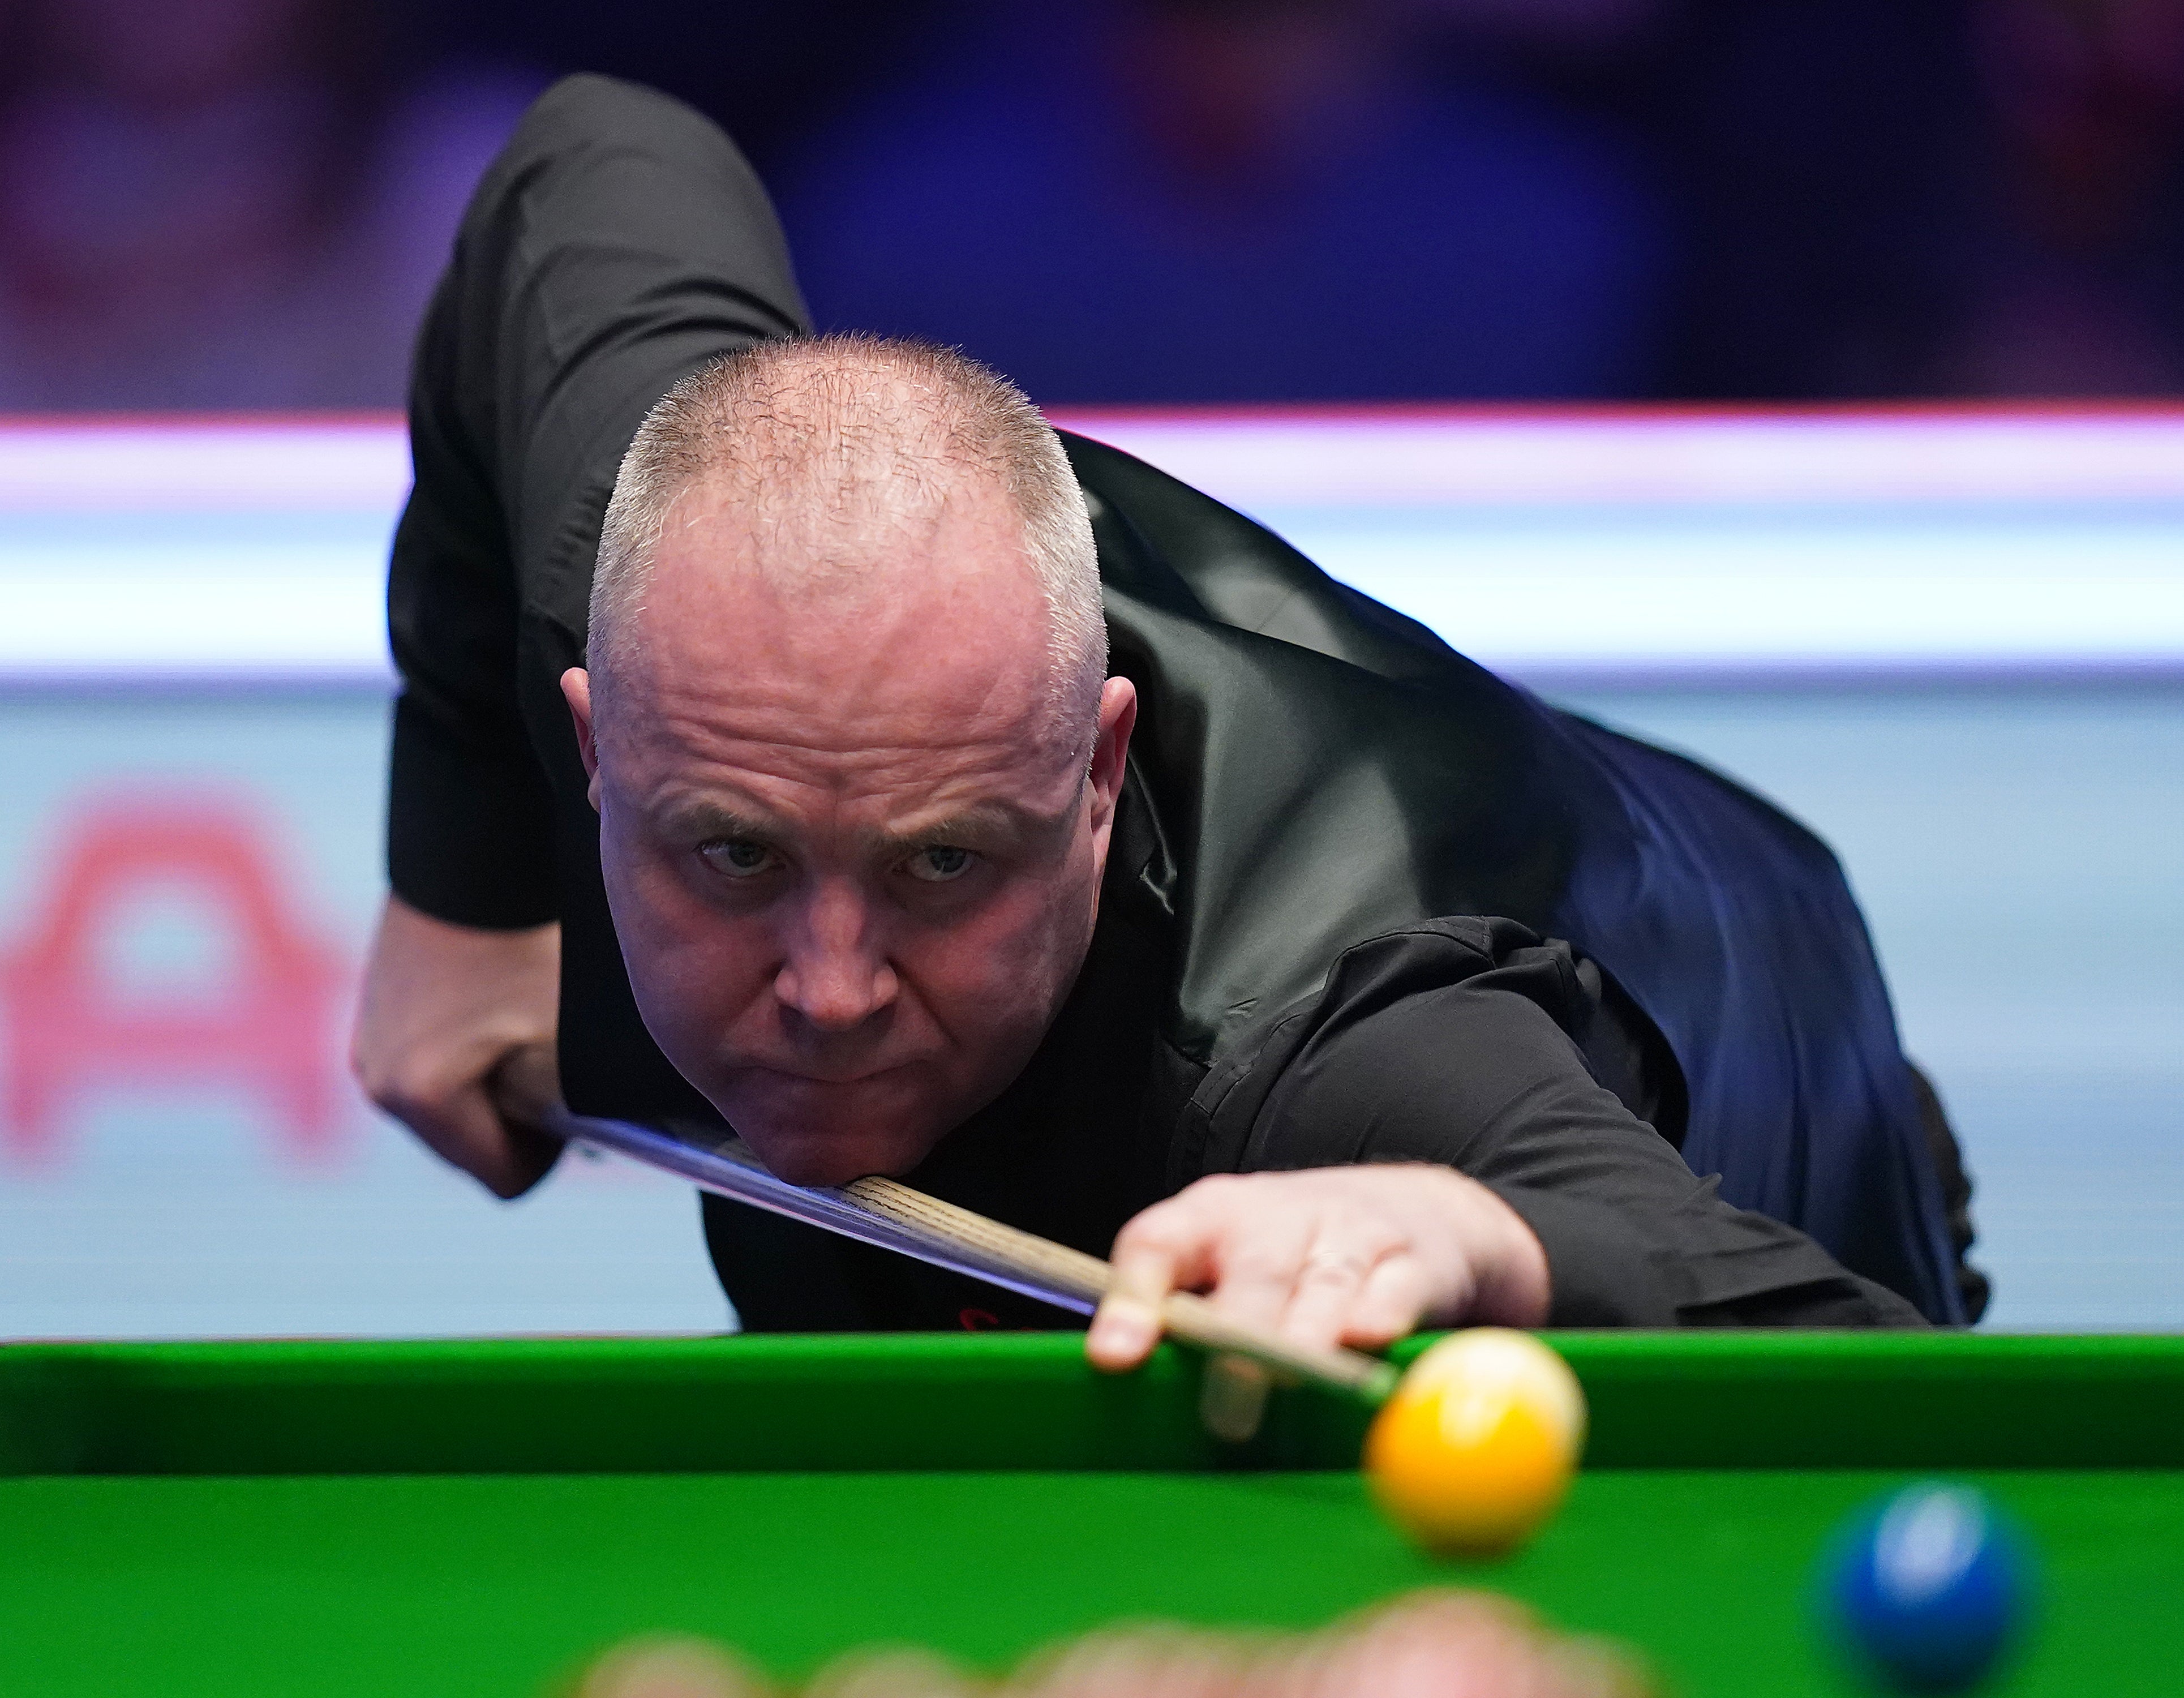 John Higgins battles back to beat Zhao Xintong at Cazoo Tour Championship The Independent